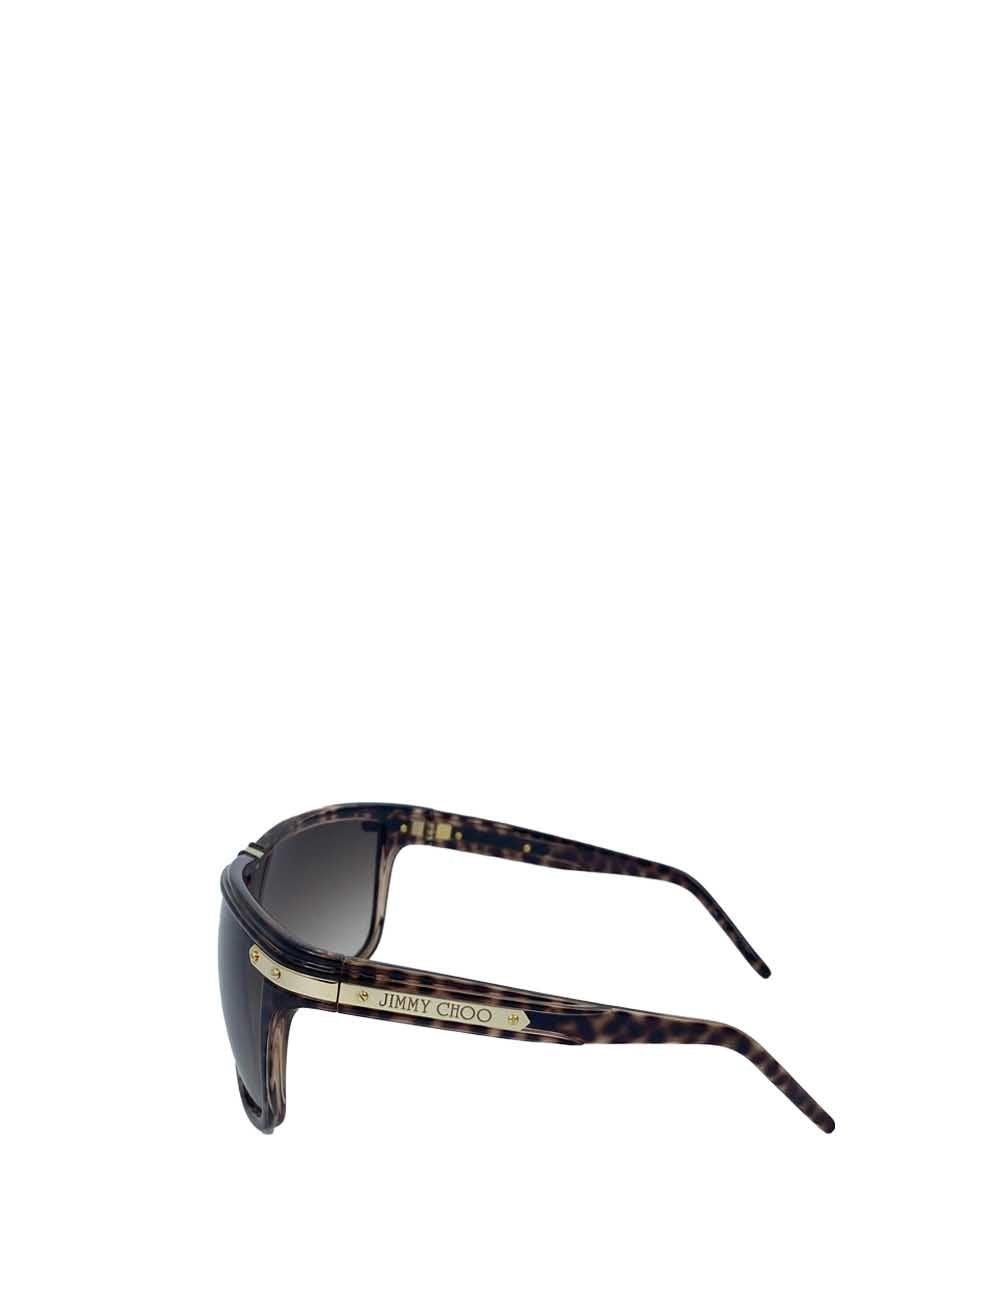 Jimmy Choo Tortoise shell mirrored-lens polarized Jimmy Choo aviator sunglasses.

Additional information:
Hardware: Acetate 
Lens: Mirrored, Purple
Size: 52/21/125
Overall condition: Excellent
Extras: Includes dust bag
